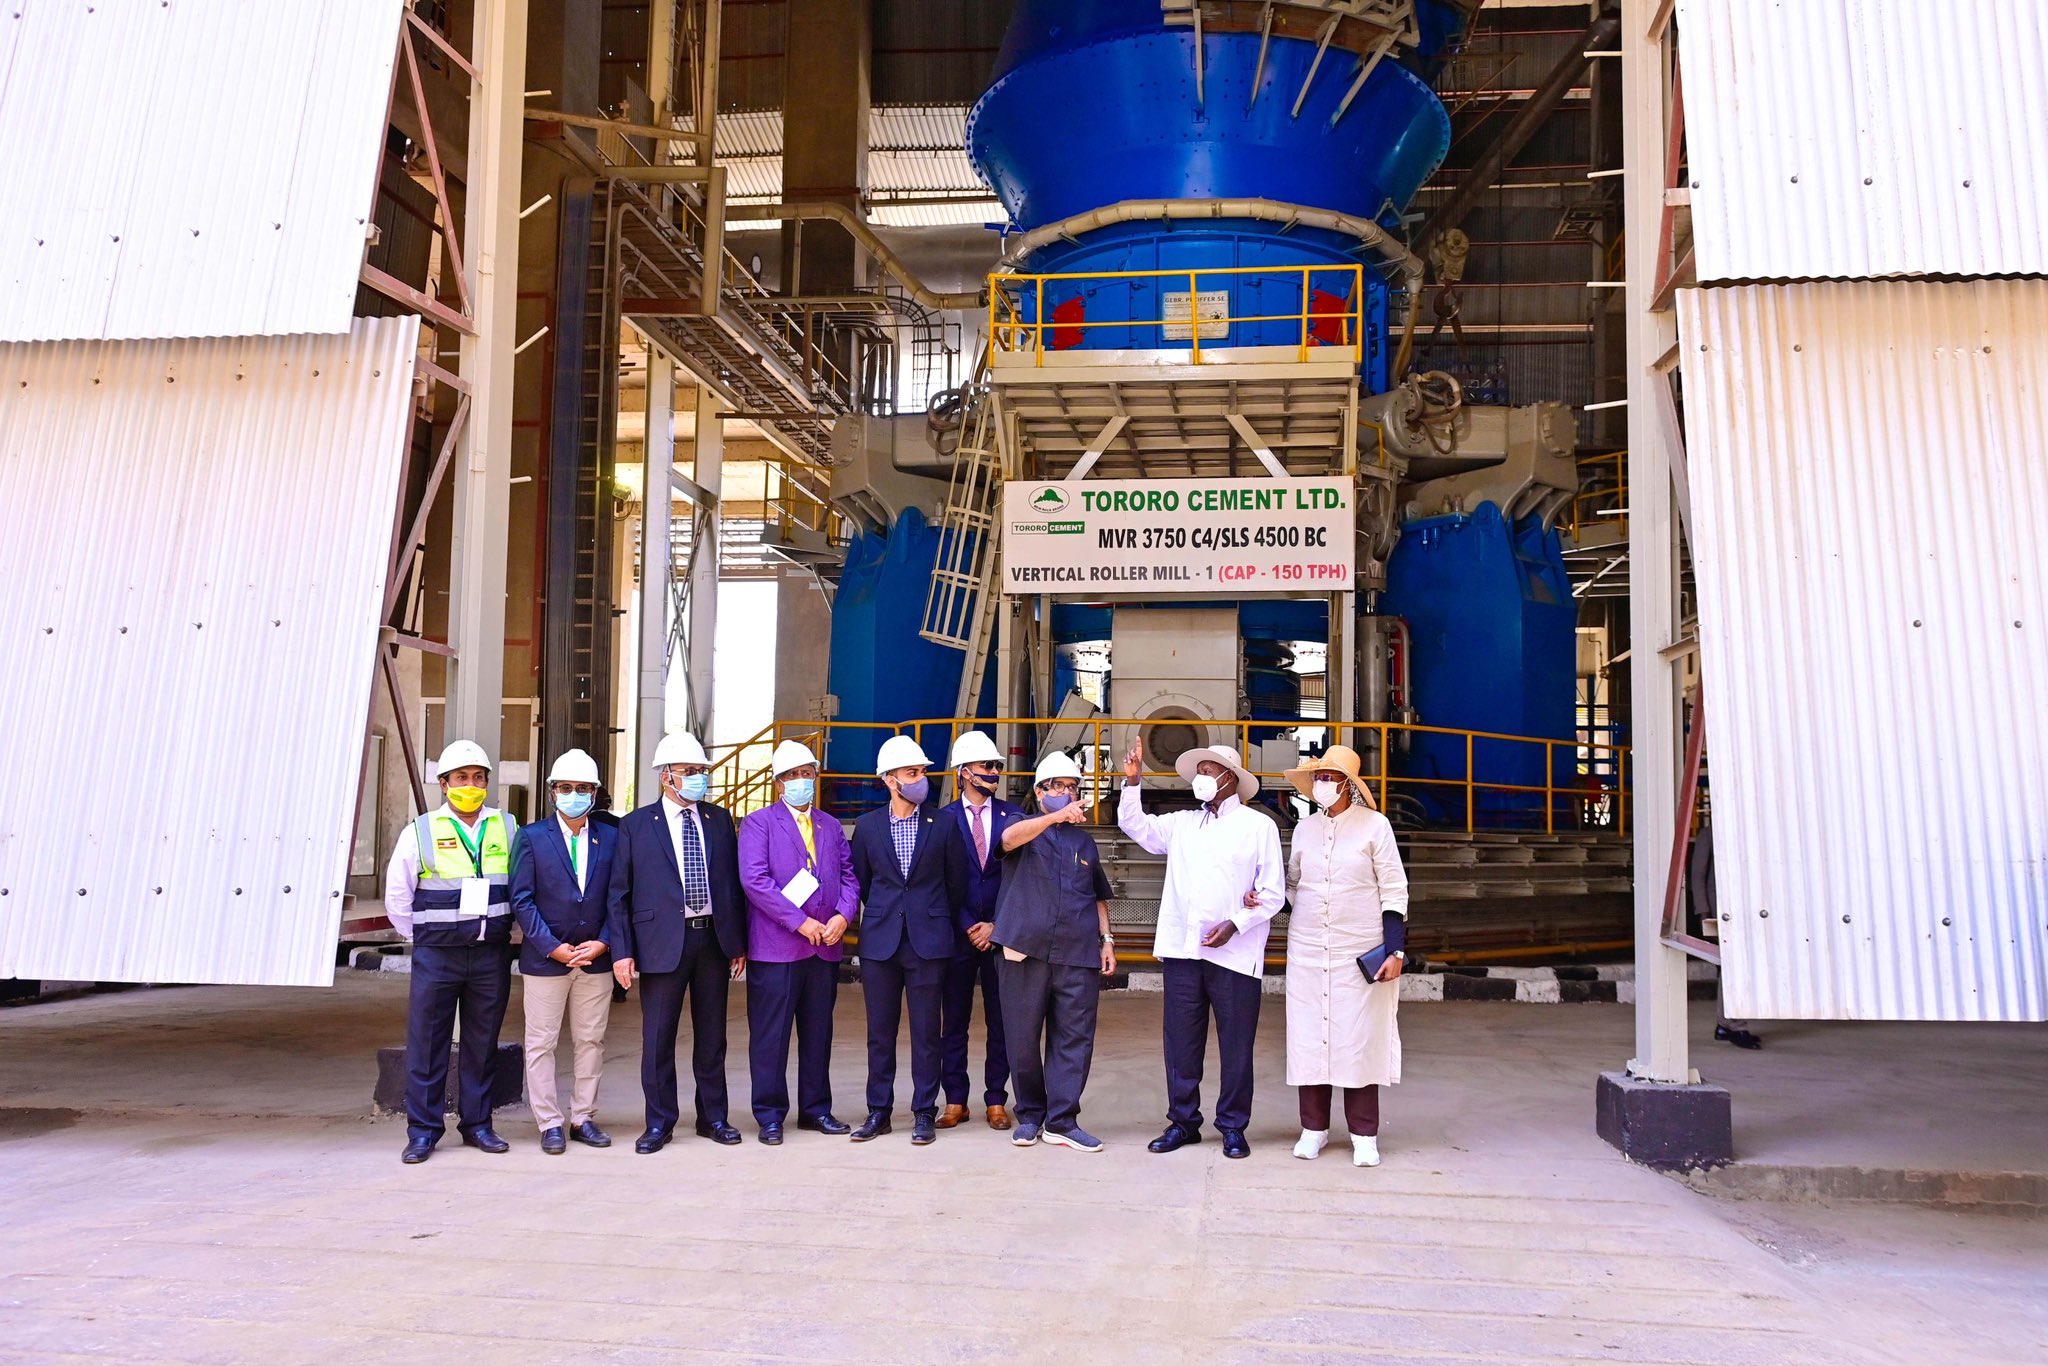 President Museveni Calls Upon Politicians & Public Servants To Support Investors As He Commissions New Tororo Cement Plant